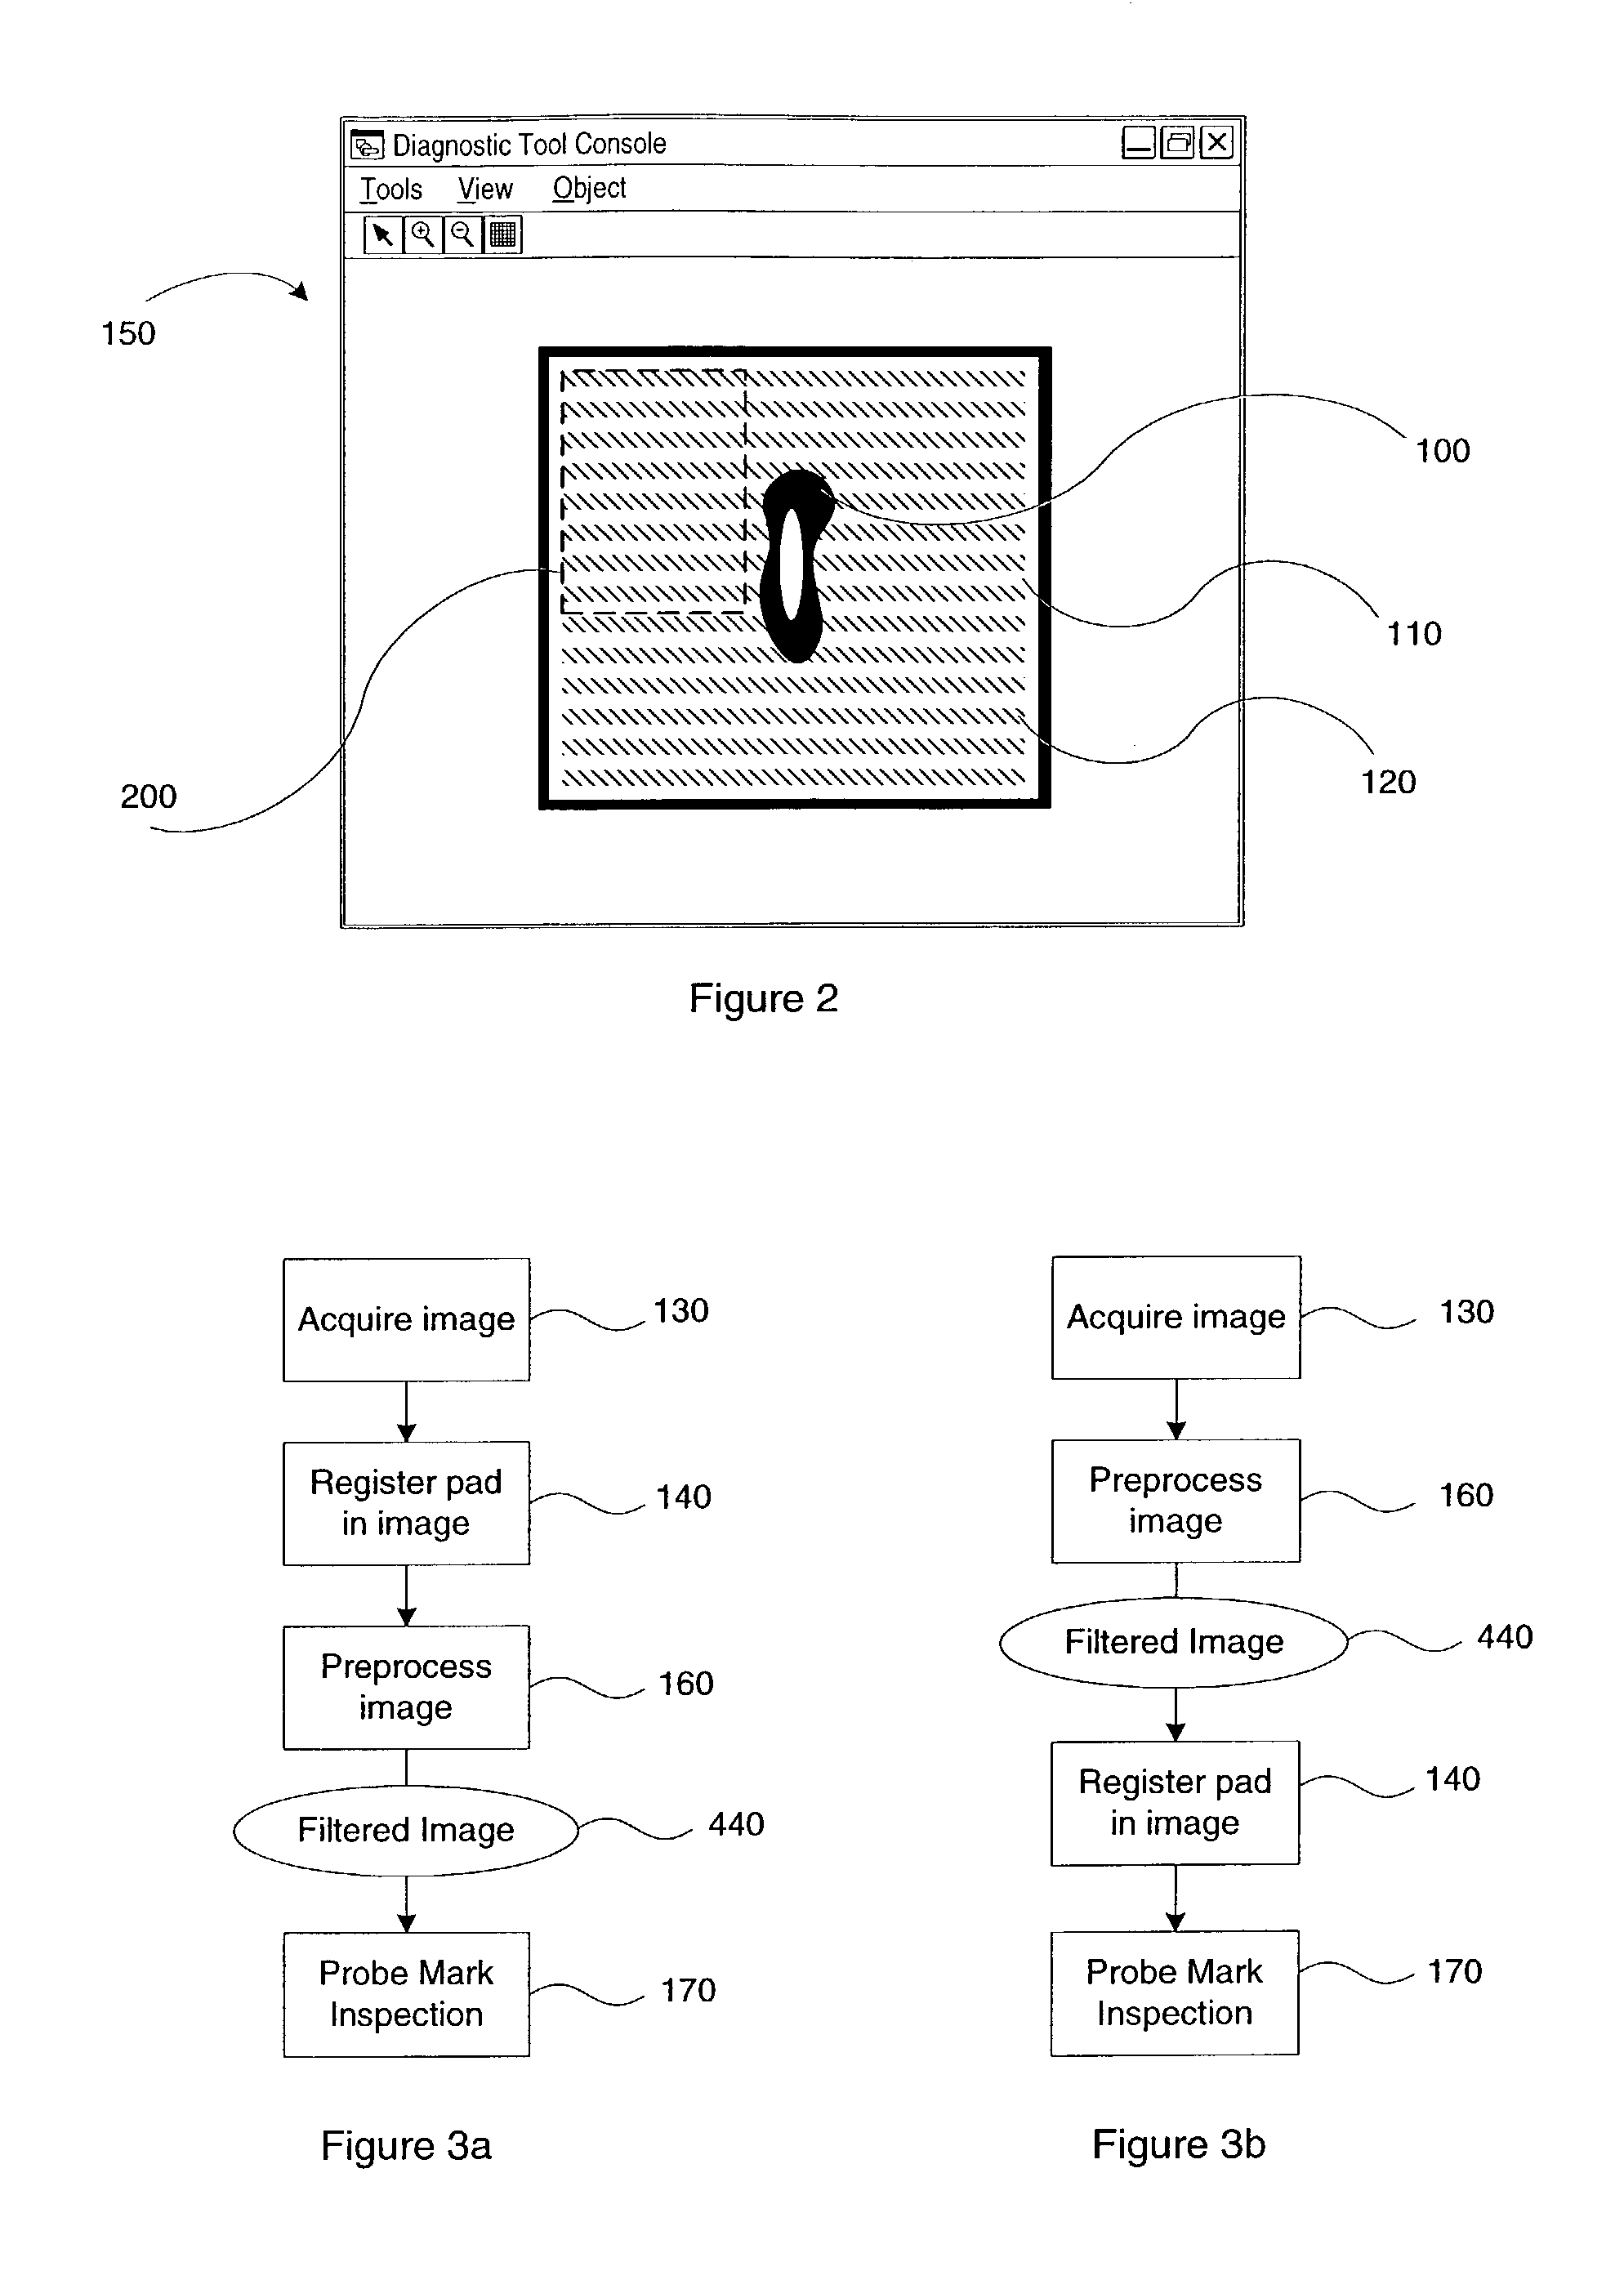 Image preprocessing for probe mark inspection